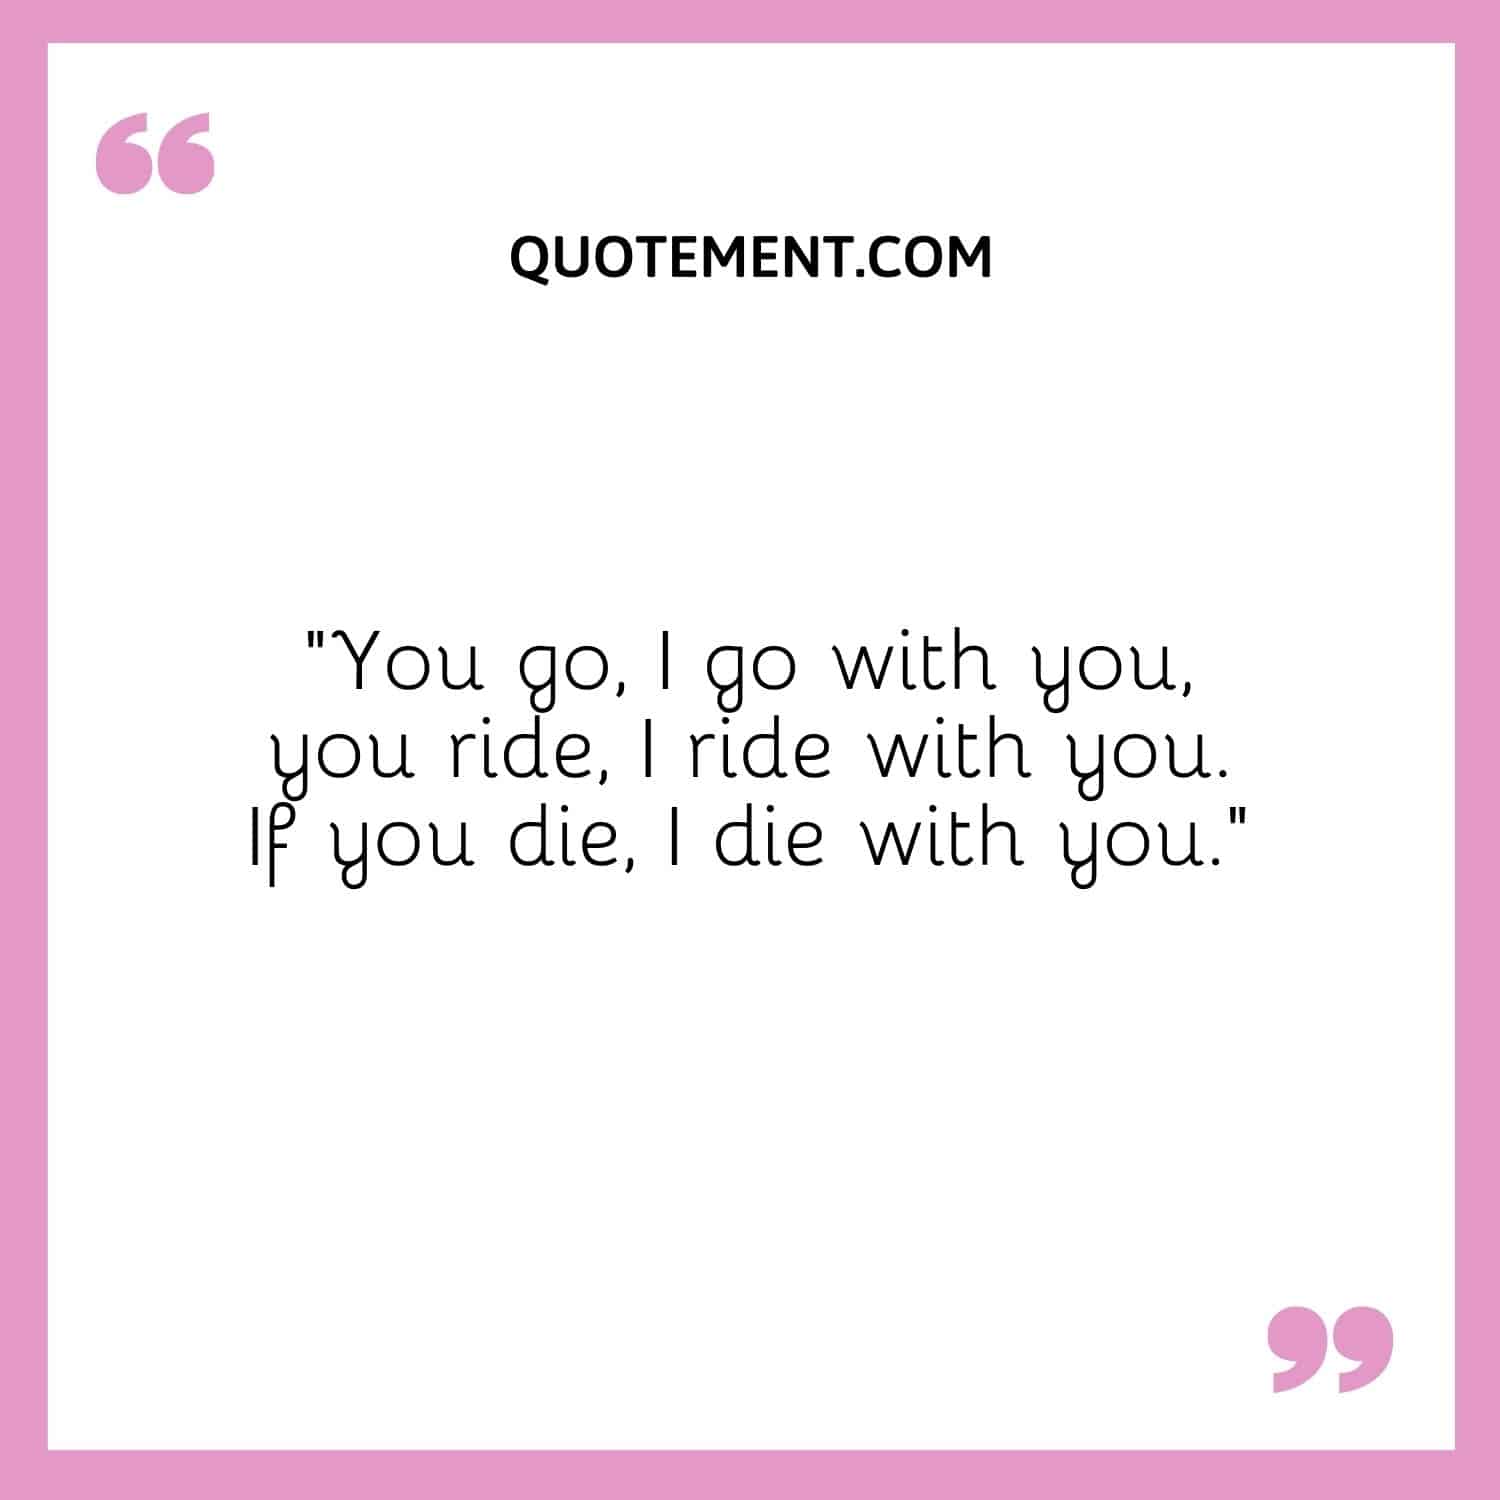 You go, I go with you, you ride, I ride with you. If you die, I die with you.